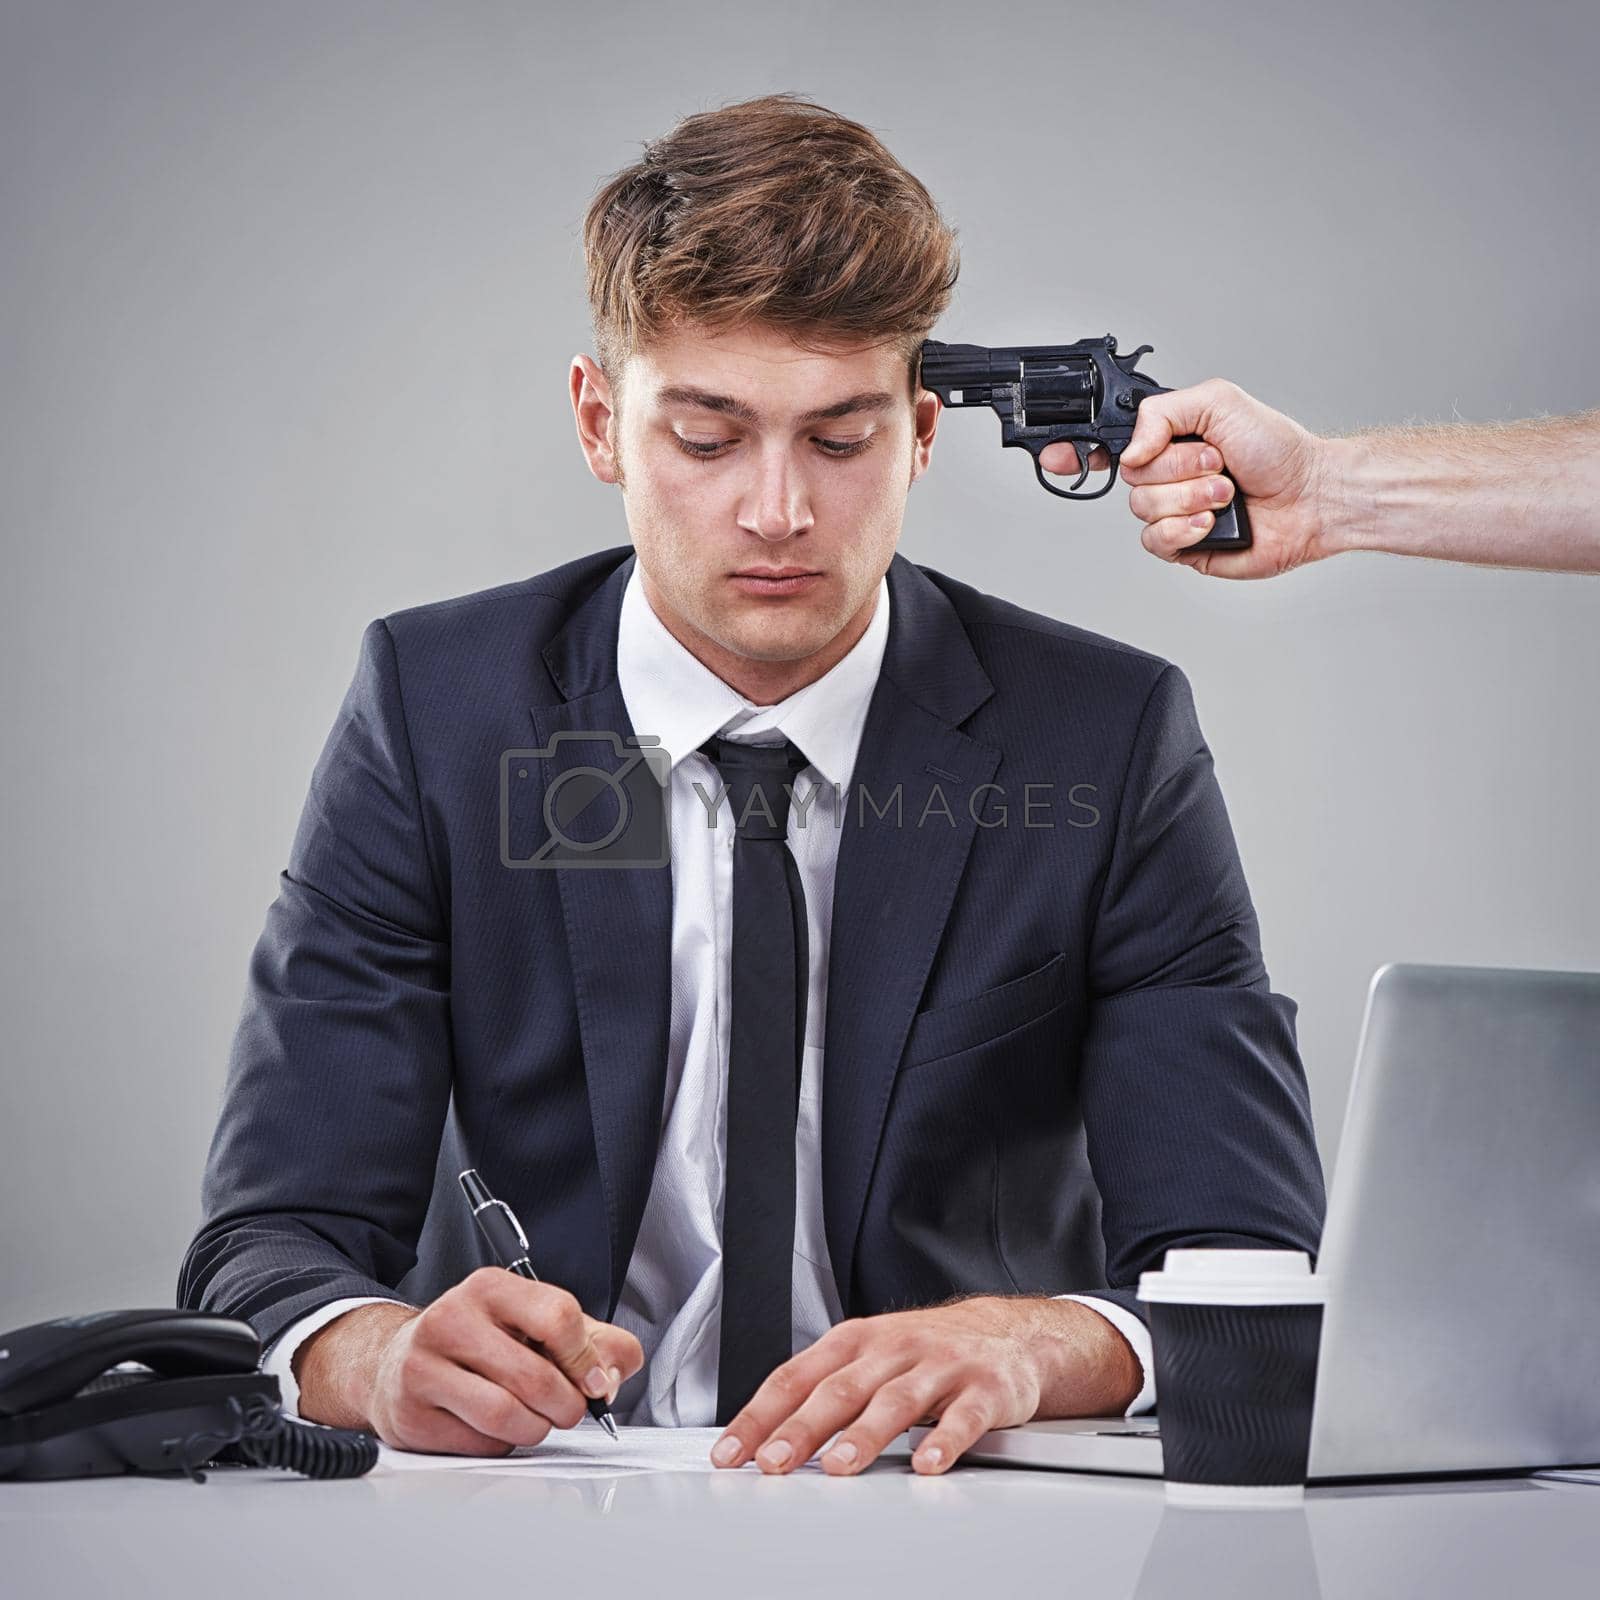 Royalty free image of Being forced to sign the papers. A business man signing a piece of paper with someone pointing a gun at his head. by YuriArcurs